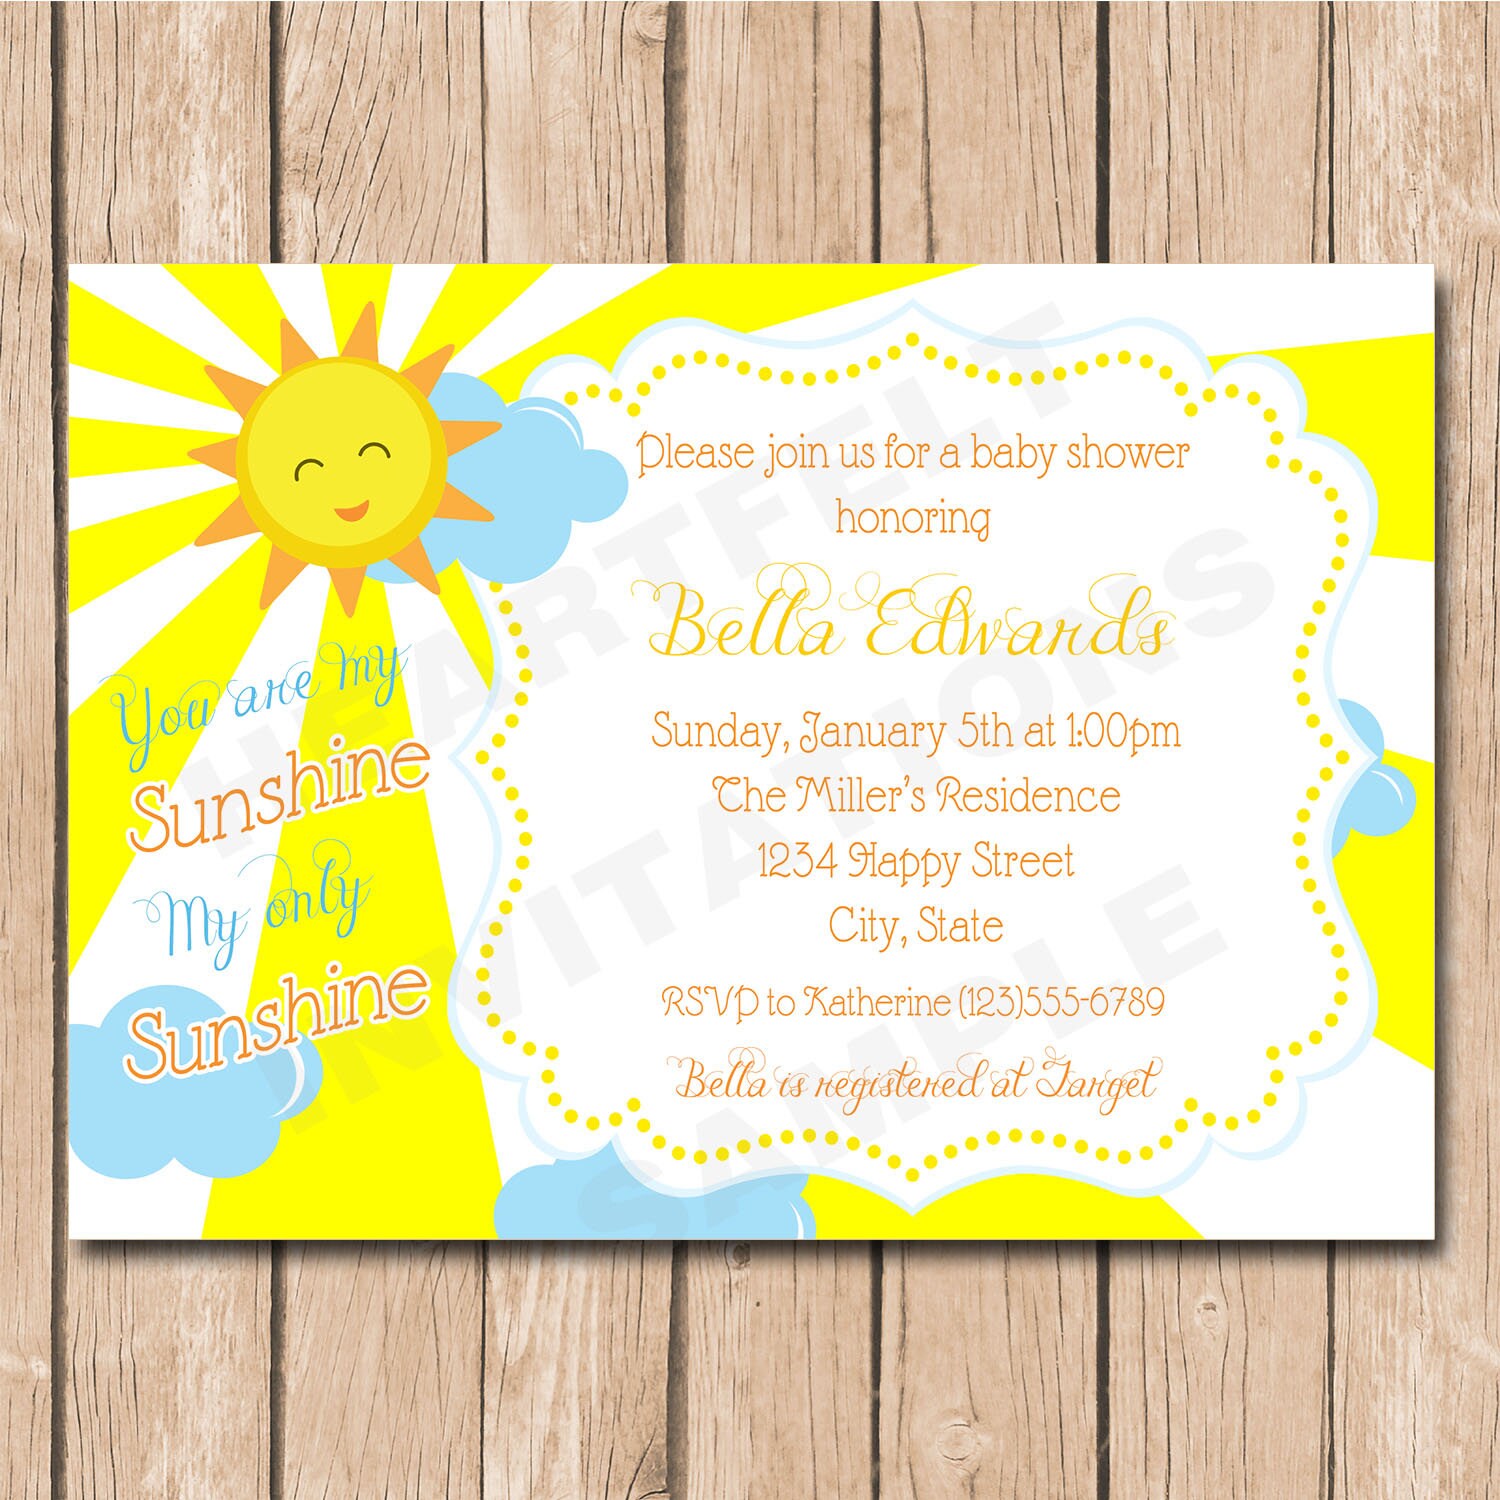 printable you are my sunshine stationery template